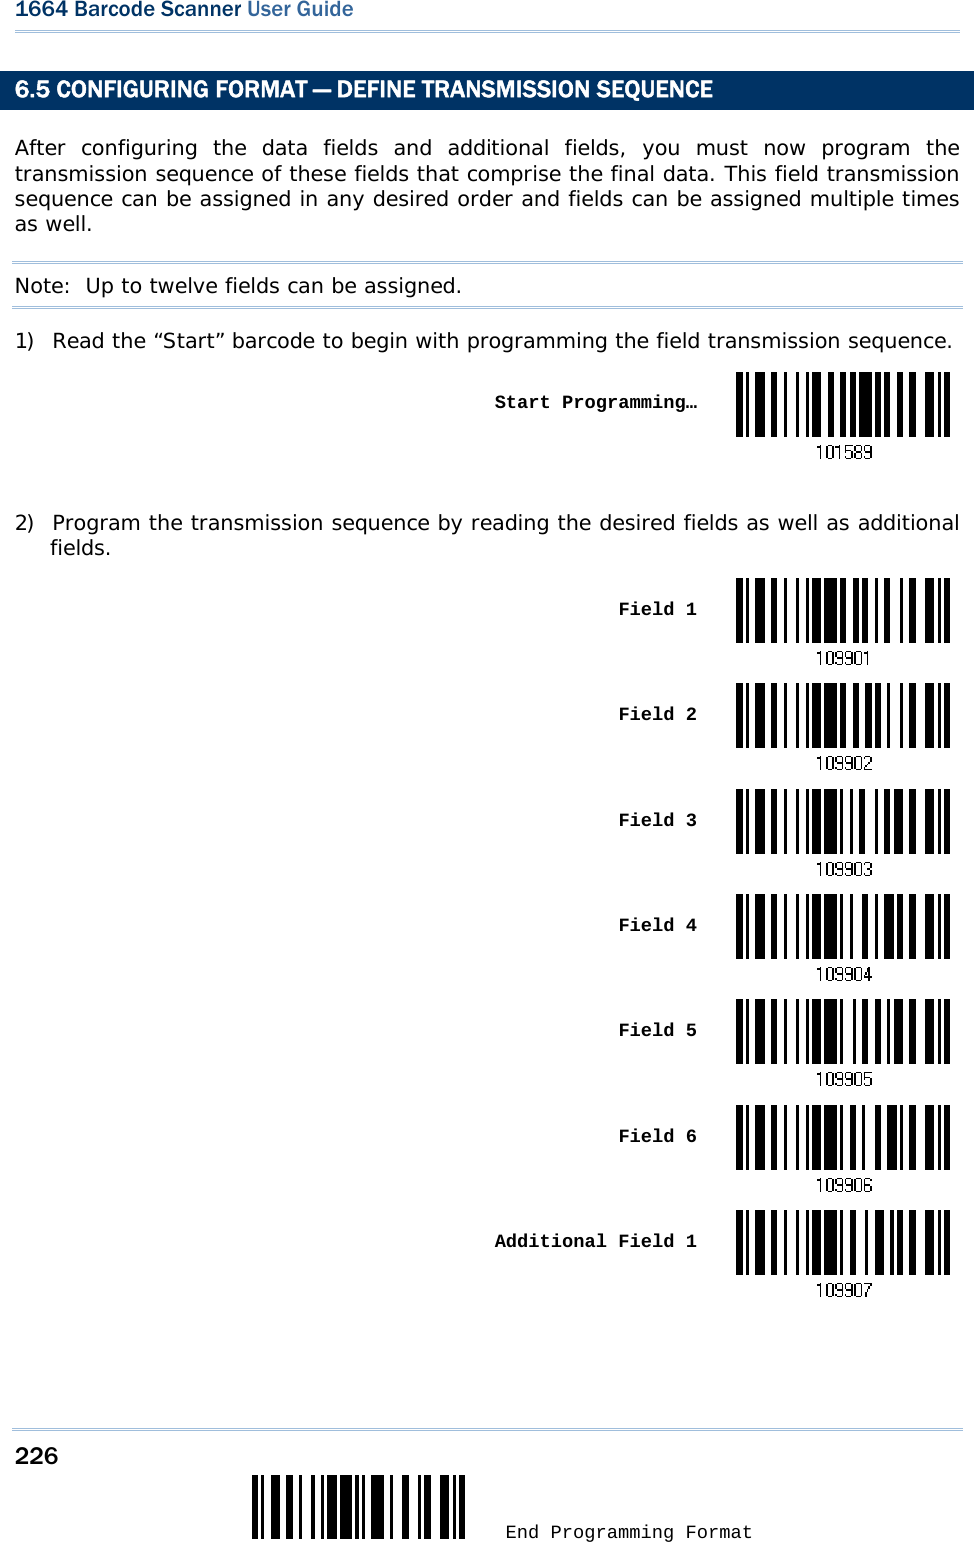 226  End Programming Format 1664 Barcode Scanner User Guide  6.5 CONFIGURING FORMAT — DEFINE TRANSMISSION SEQUENCE After configuring the data fields and additional fields, you must now program the transmission sequence of these fields that comprise the final data. This field transmission sequence can be assigned in any desired order and fields can be assigned multiple times as well.  Note:  Up to twelve fields can be assigned. 1) Read the “Start” barcode to begin with programming the field transmission sequence.  Start Programming… 2) Program the transmission sequence by reading the desired fields as well as additional fields.  Field 1 Field 2 Field 3 Field 4 Field 5 Field 6 Additional Field 1